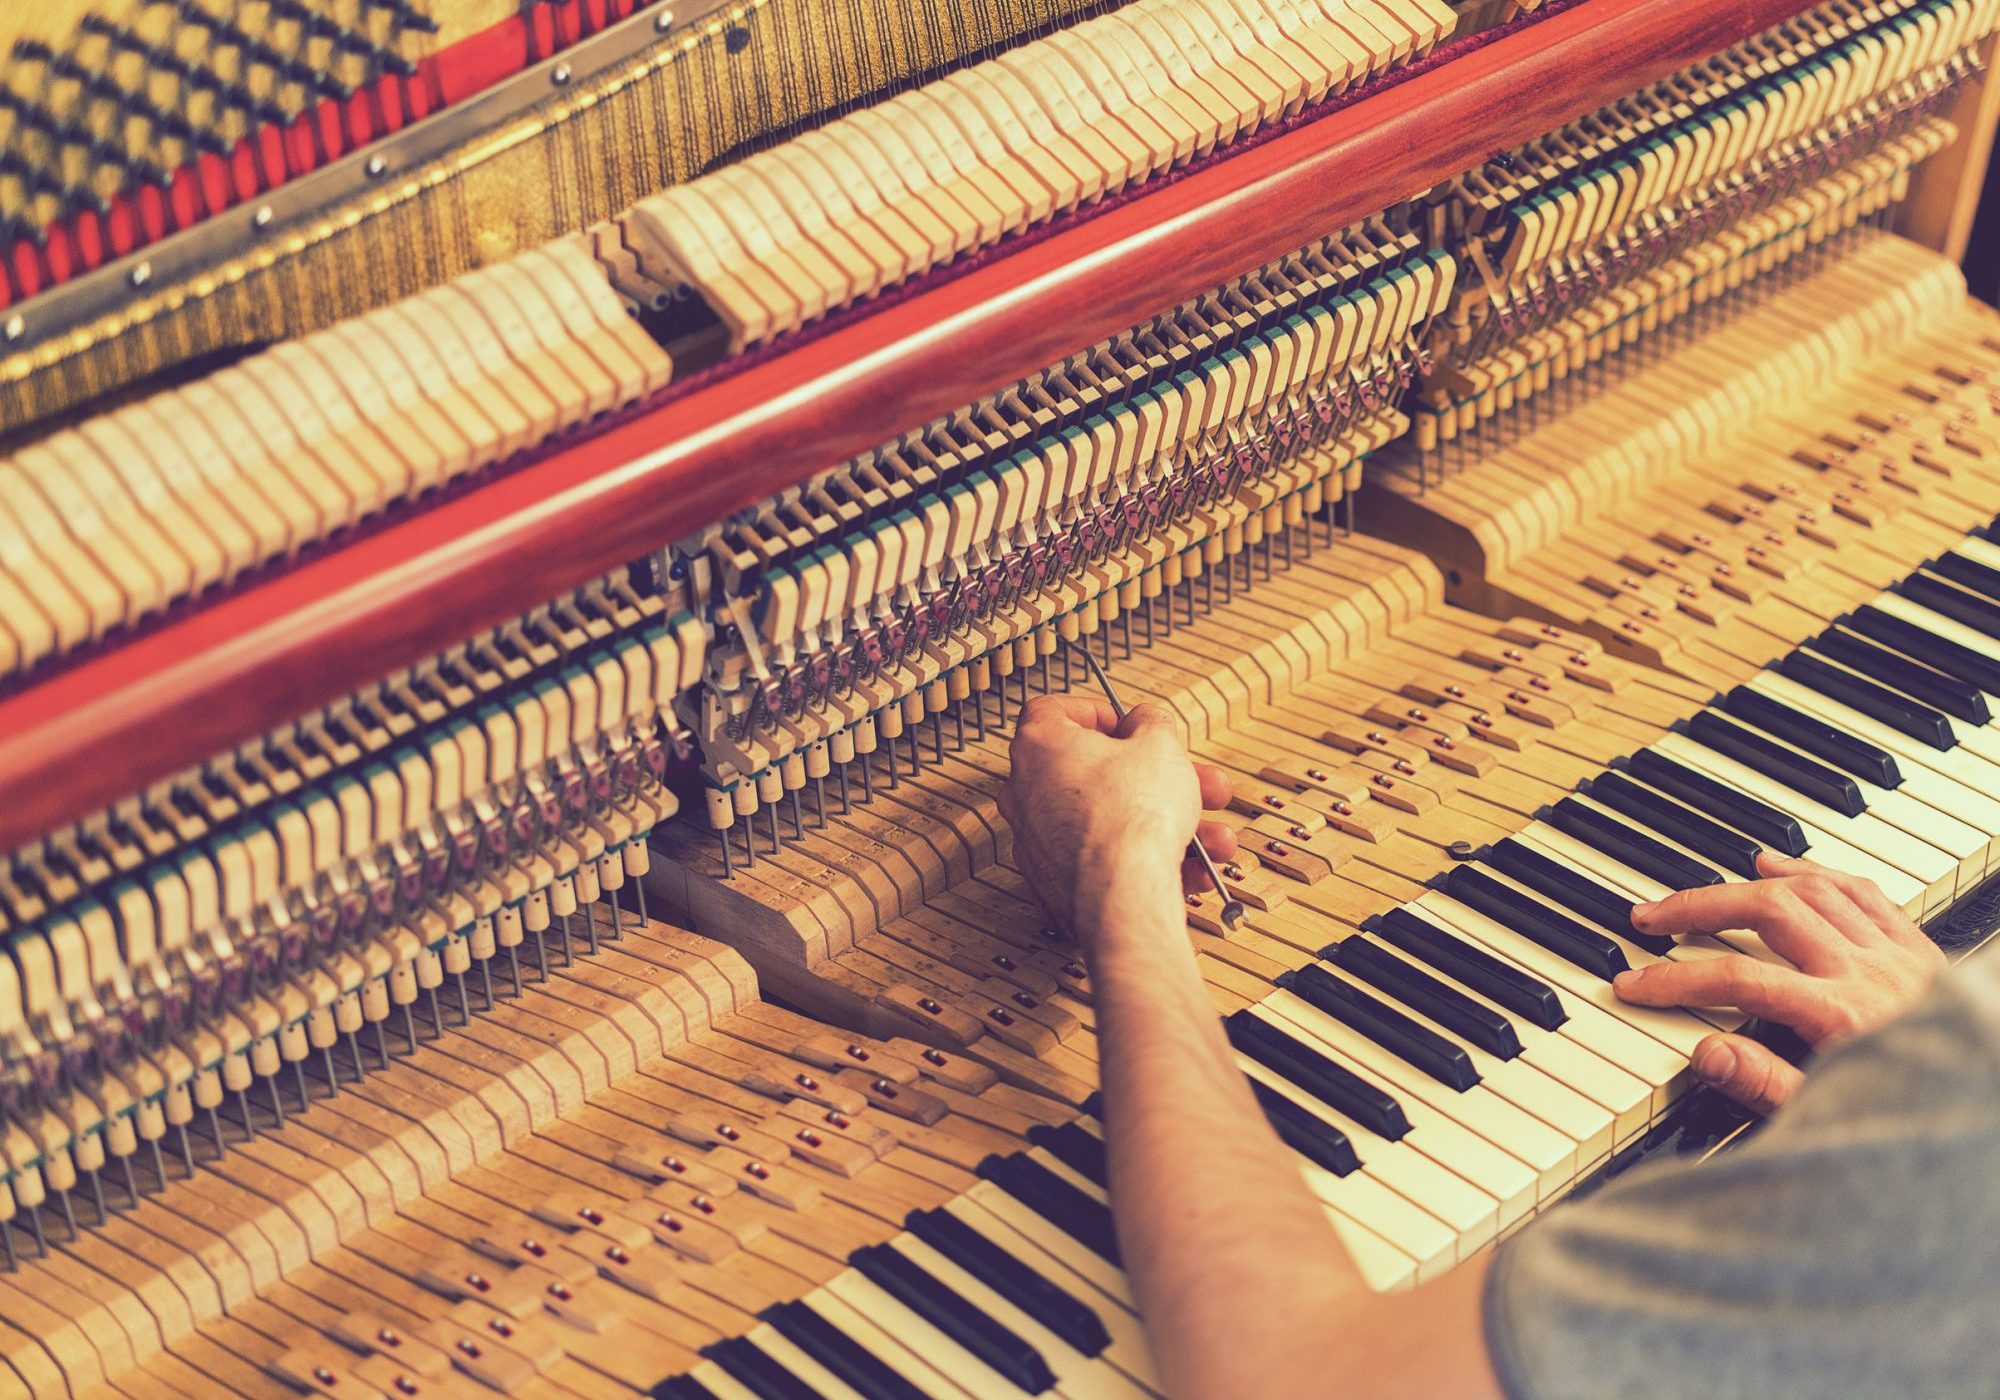 The company is now run by Graham Brown who has over 30 years’ experience as a piano tuner and technician.  I can tune, repair and service your pianos at reasonable prices.